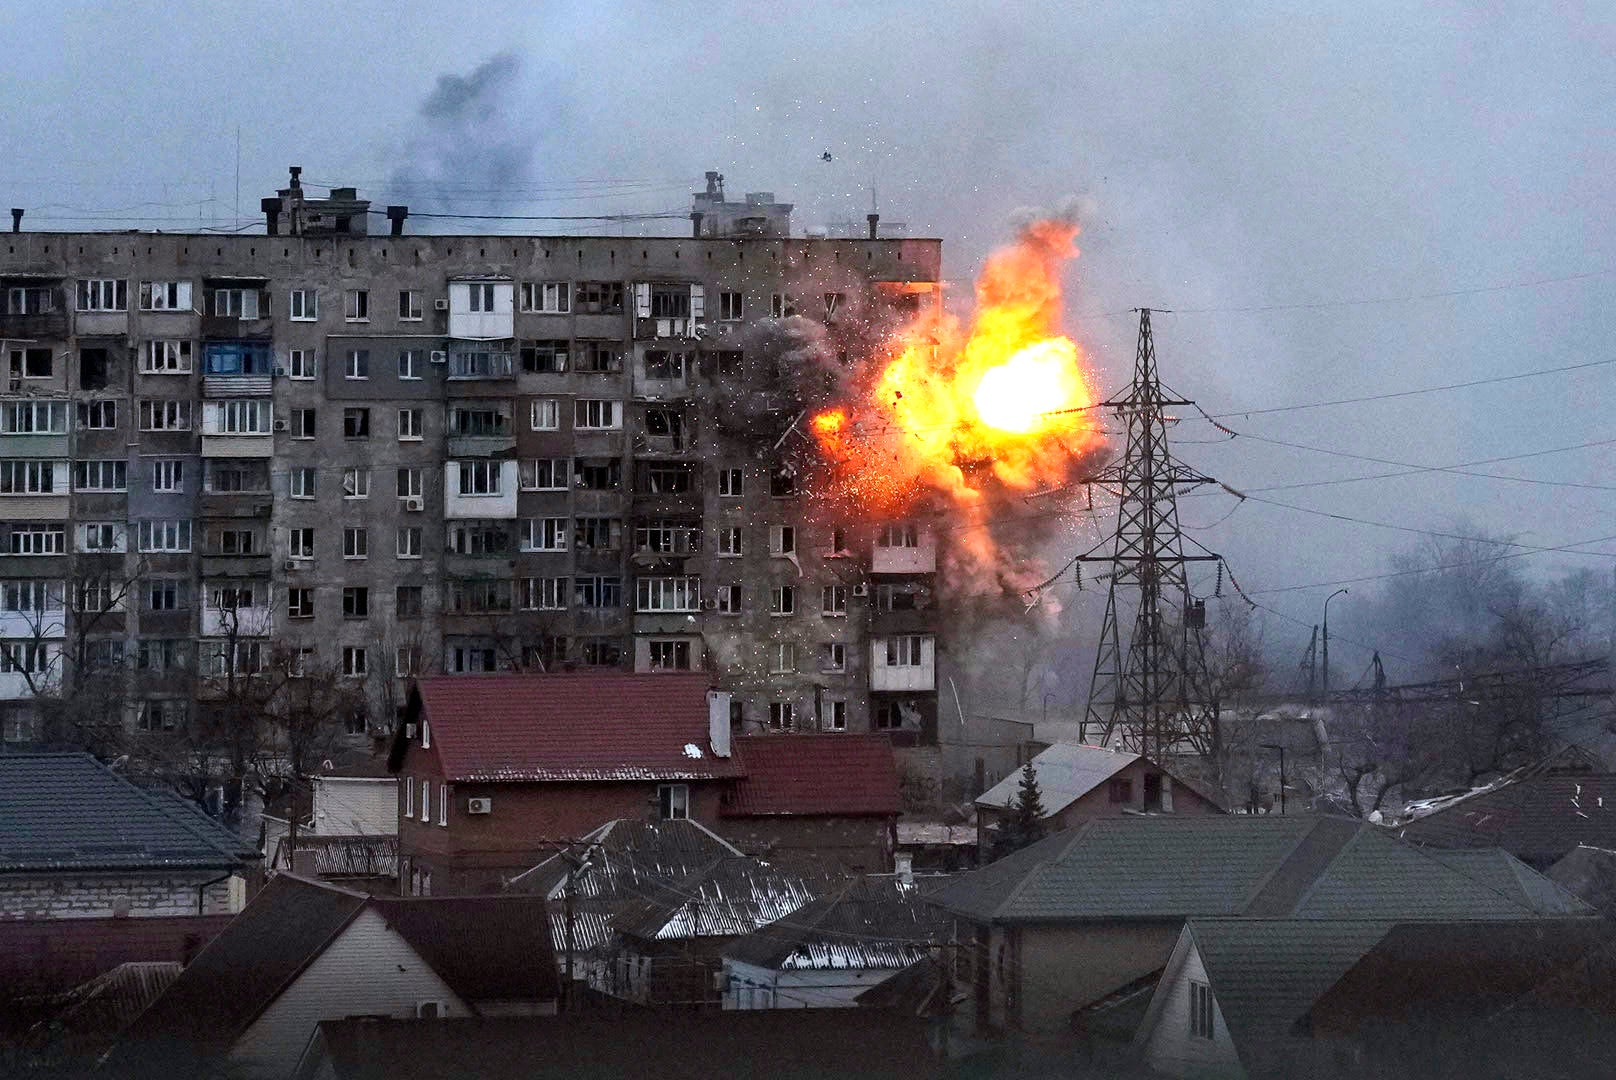 An explosion is seen in an apartment building after Russian’s army tank fires in Mariupol